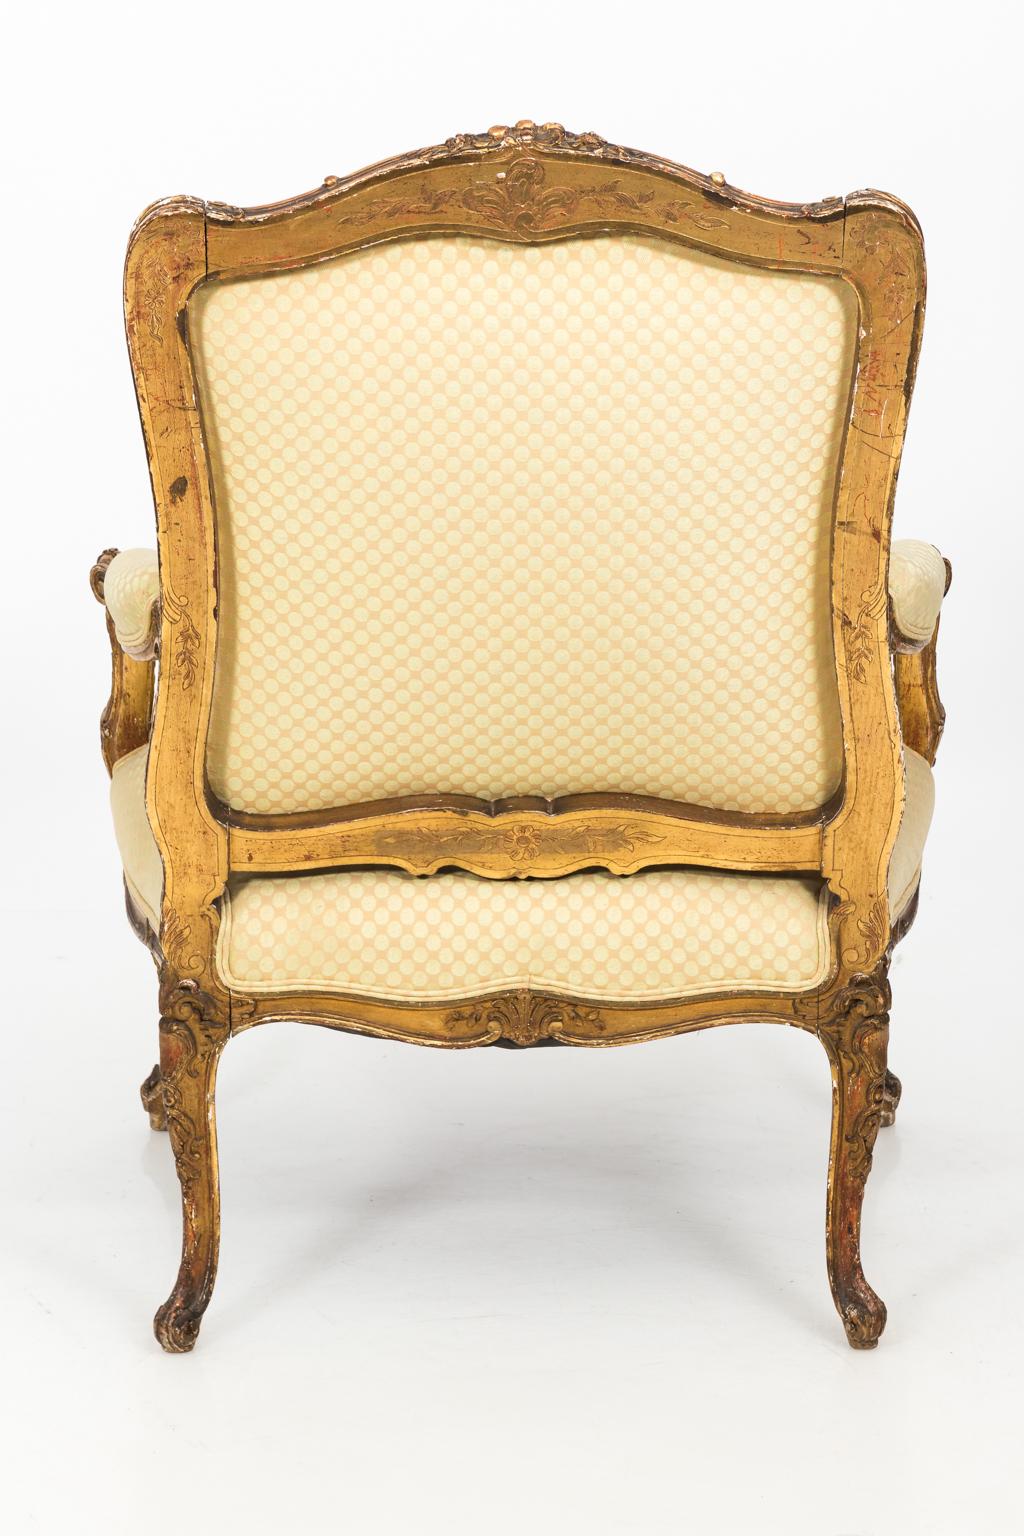 French 19th Century Giltwood Chaise Lounge Chair For Sale